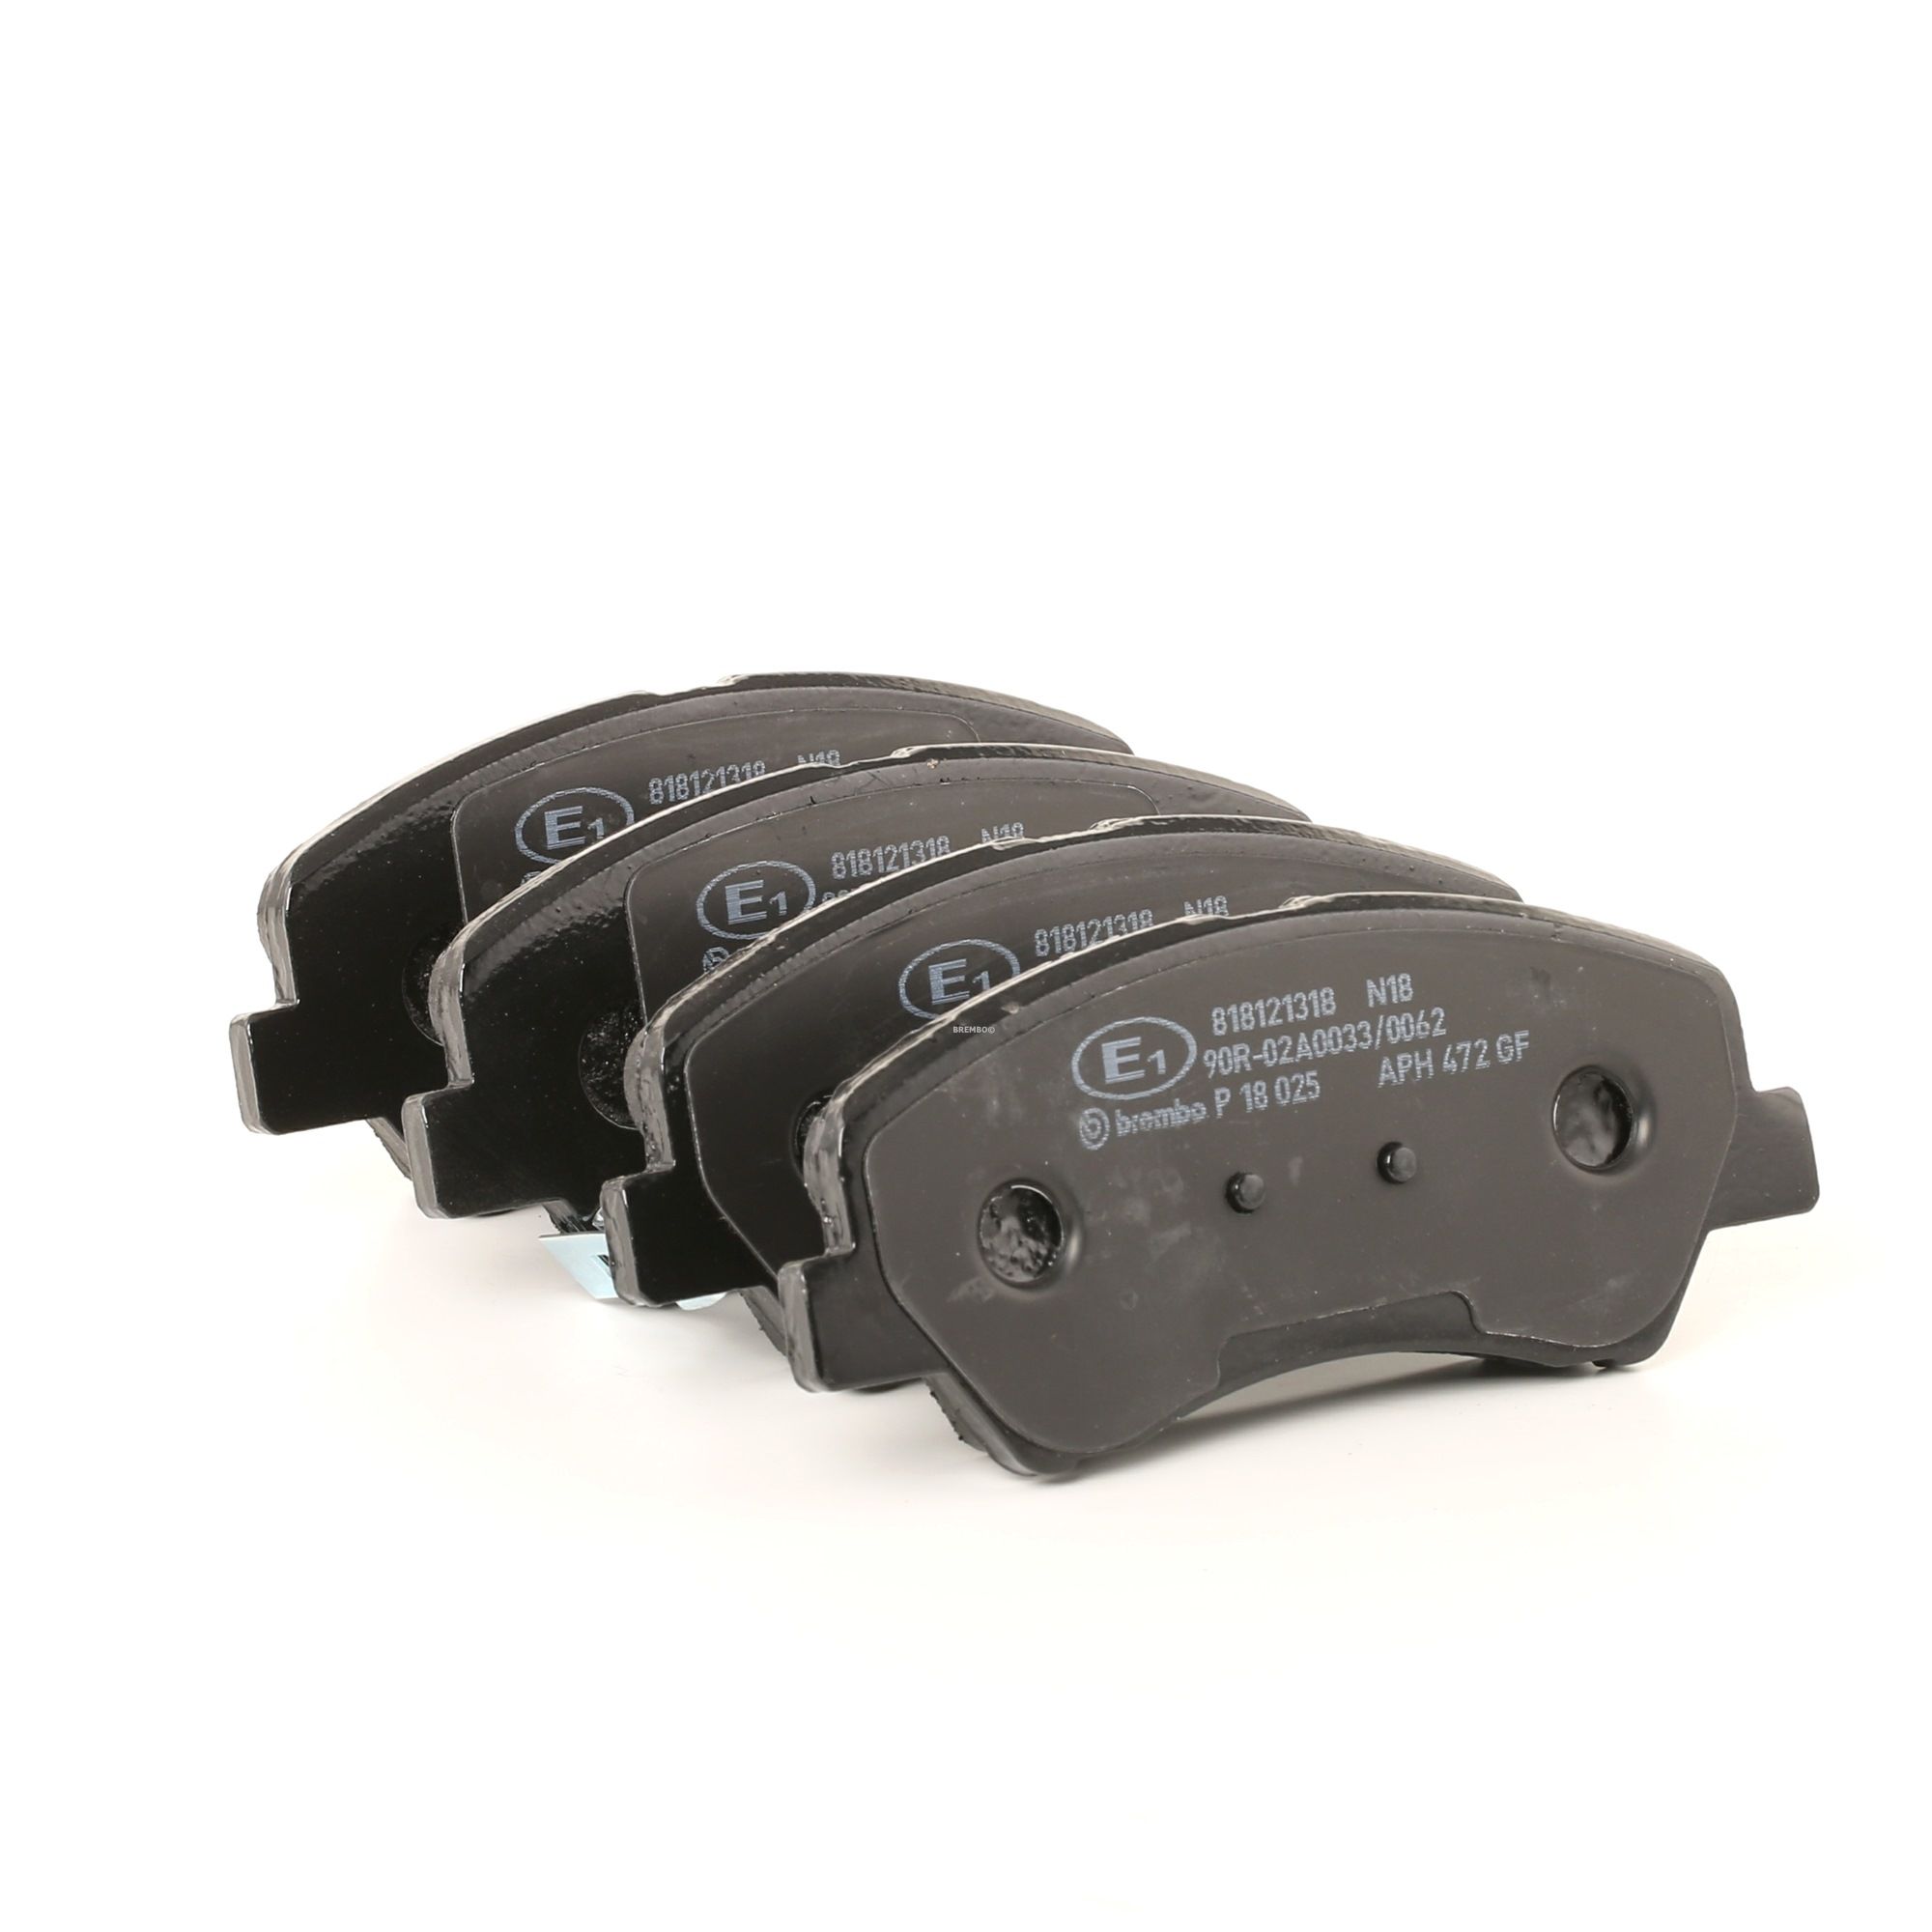 BREMBO P 18 025 Brake pad set with acoustic wear warning, with accessories